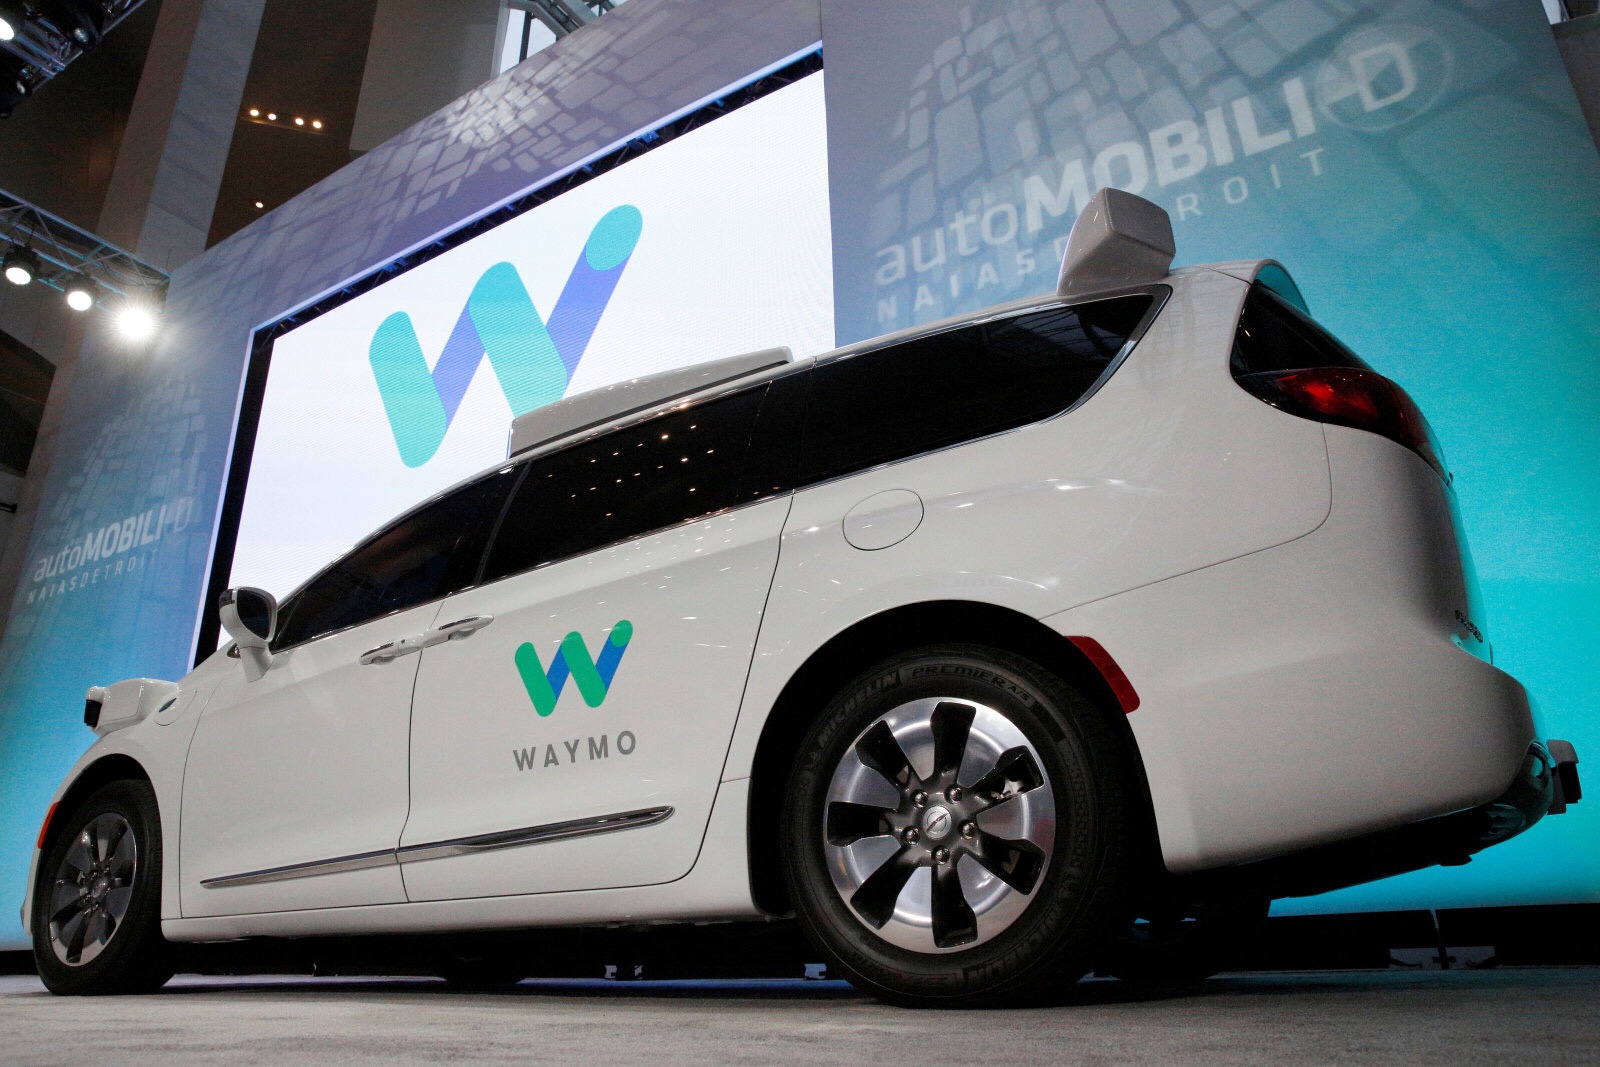 Following lawsuit, Uber is considering partnership with Waymo